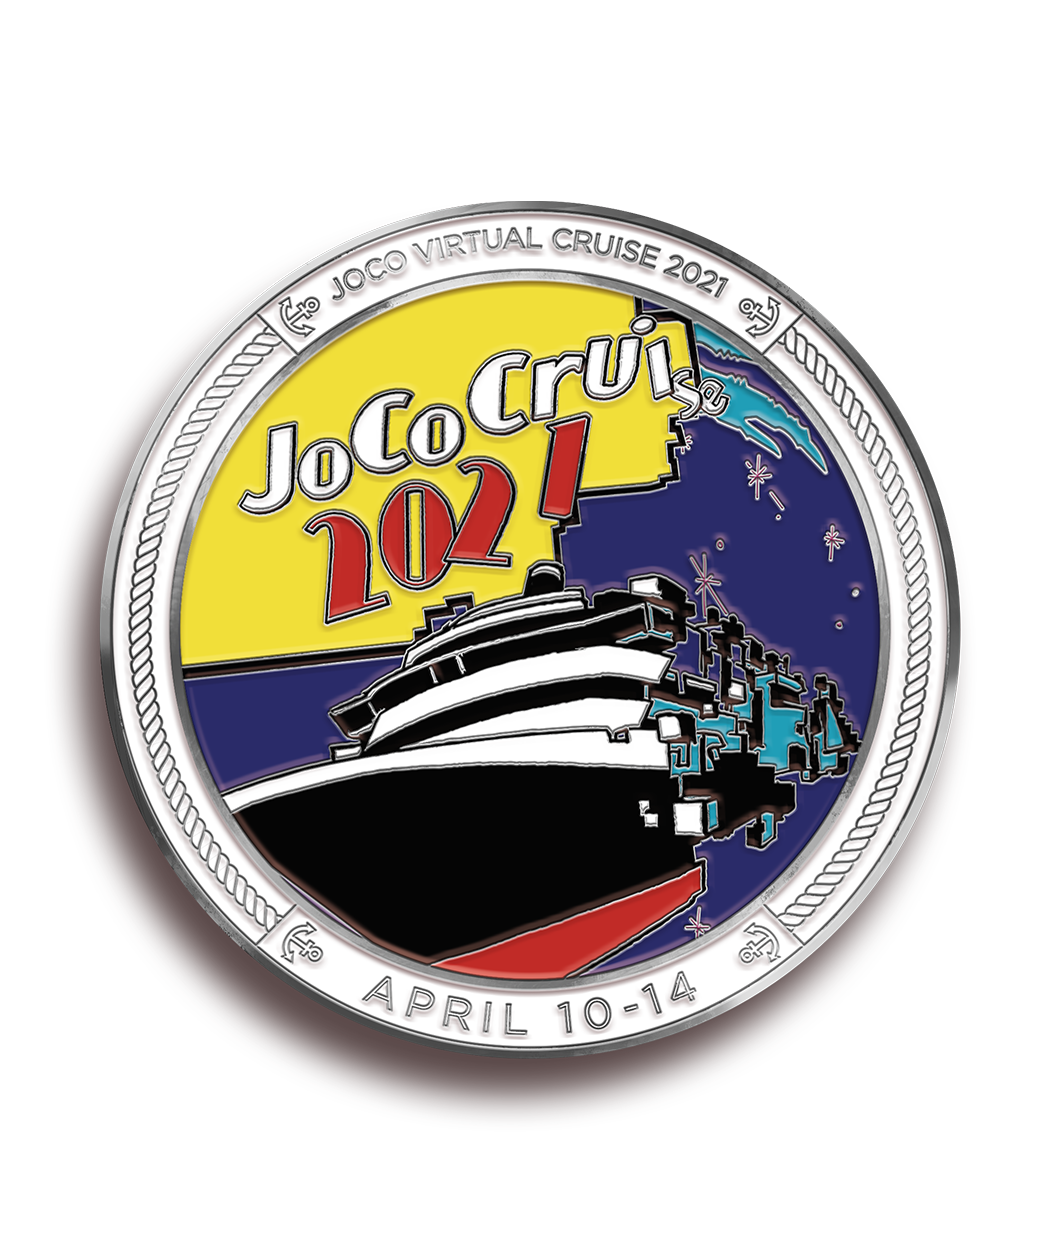 A challenge coin for the 